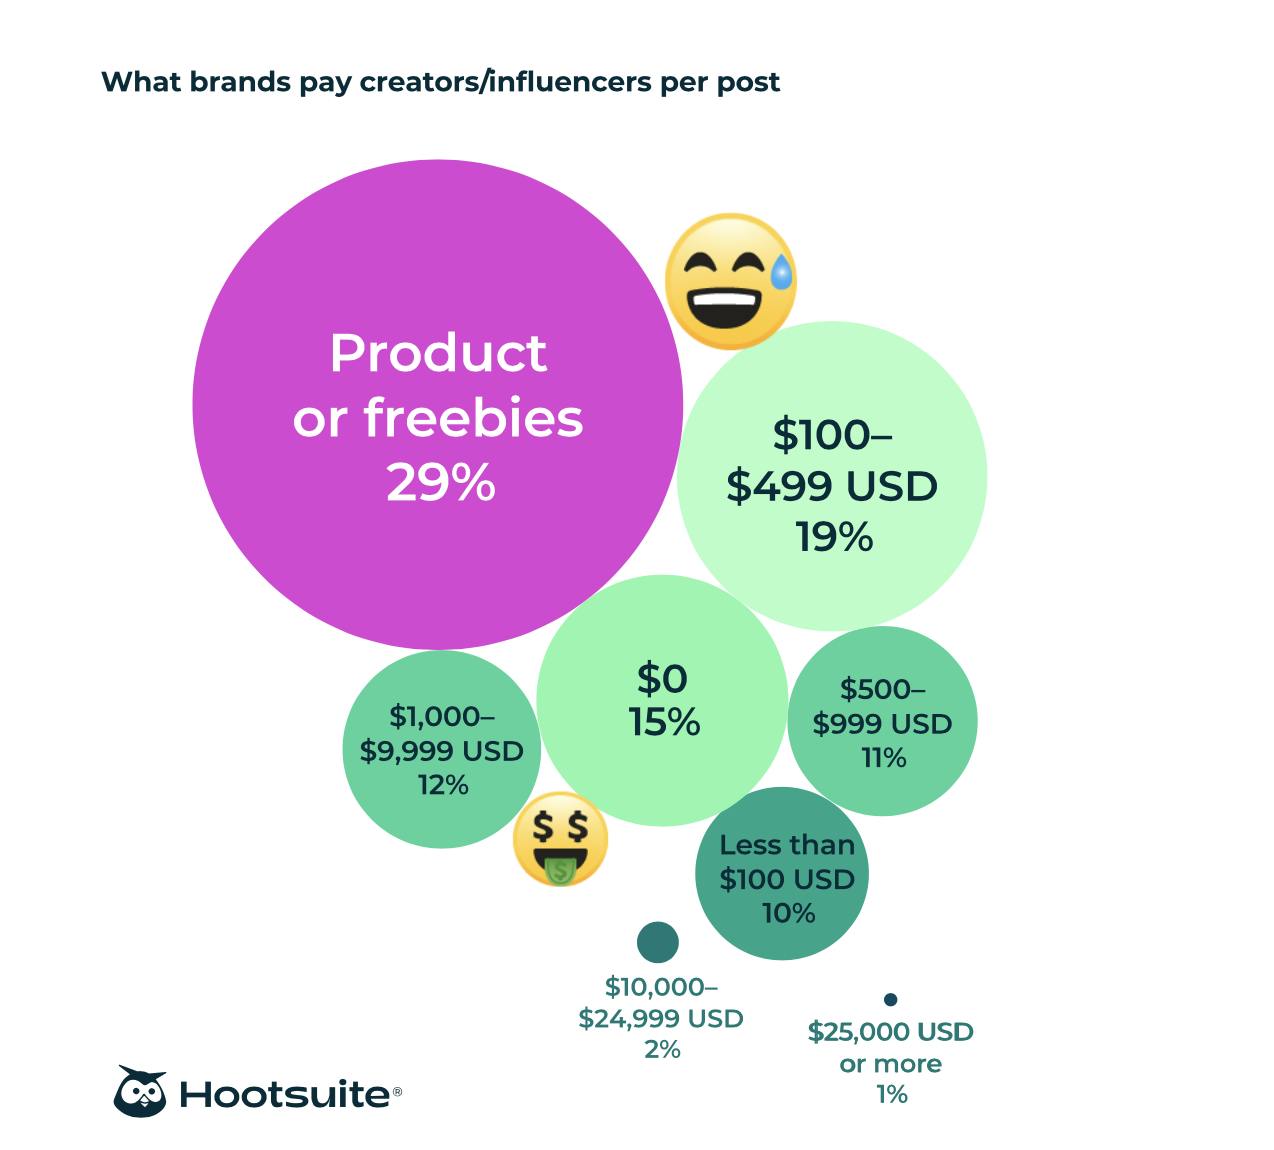 How much are influencers getting paid per post